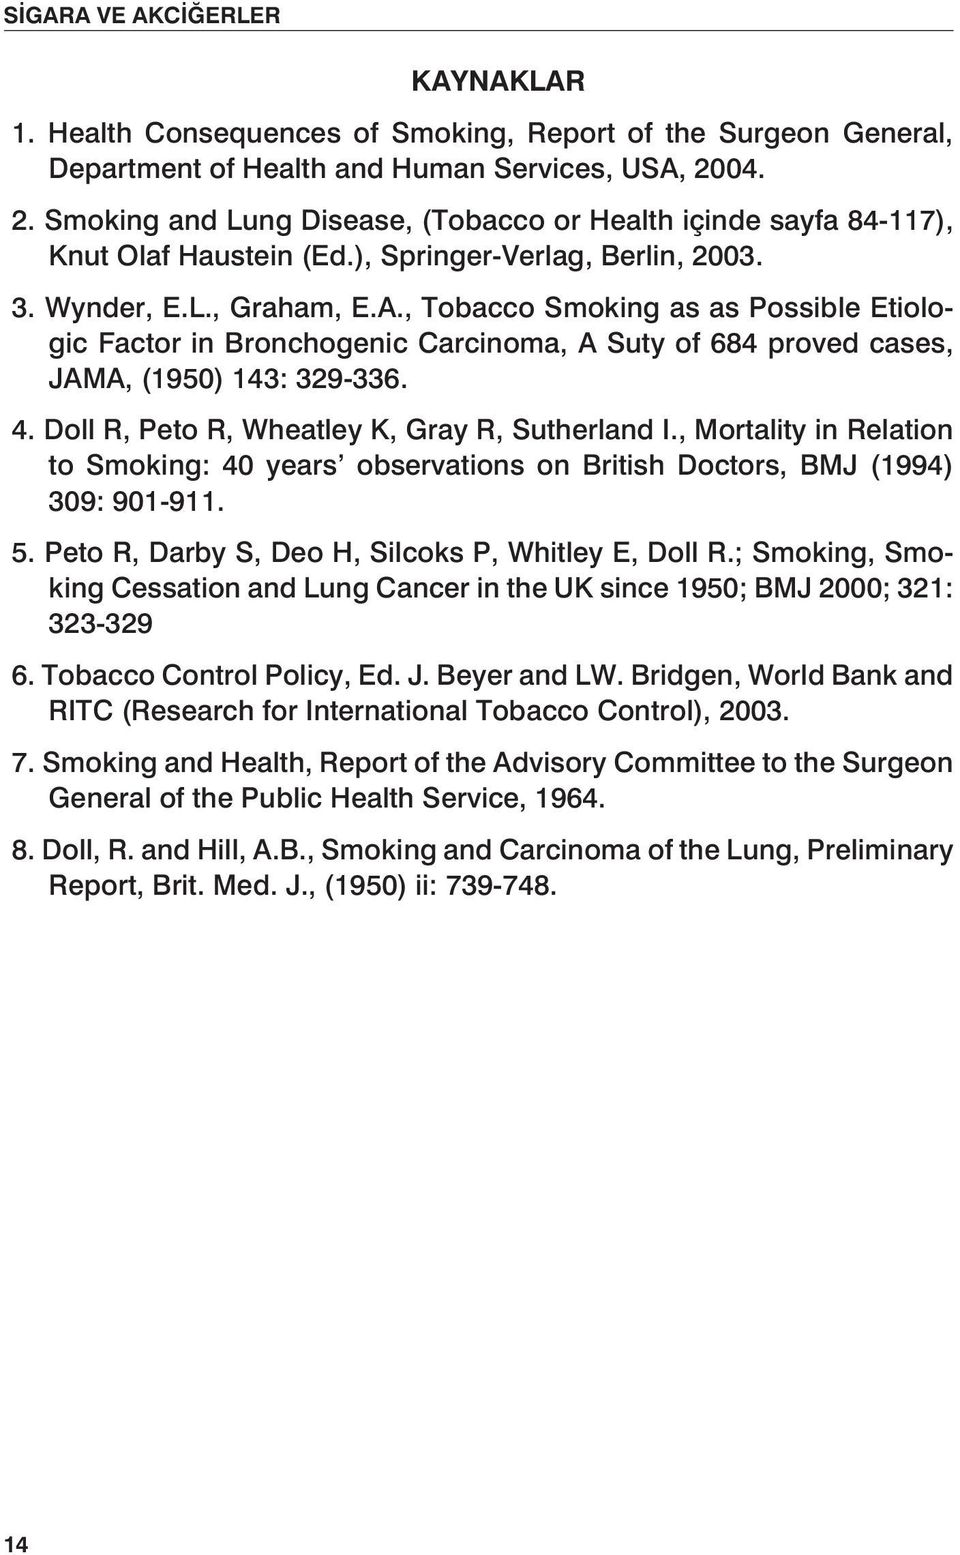 , Tobacco Smoking as as Possible Etiologic Factor in Bronchogenic Carcinoma, A Suty of 684 proved cases, JAMA, (1950) 143: 329-336. 4. Doll R, Peto R, Wheatley K, Gray R, Sutherland I.